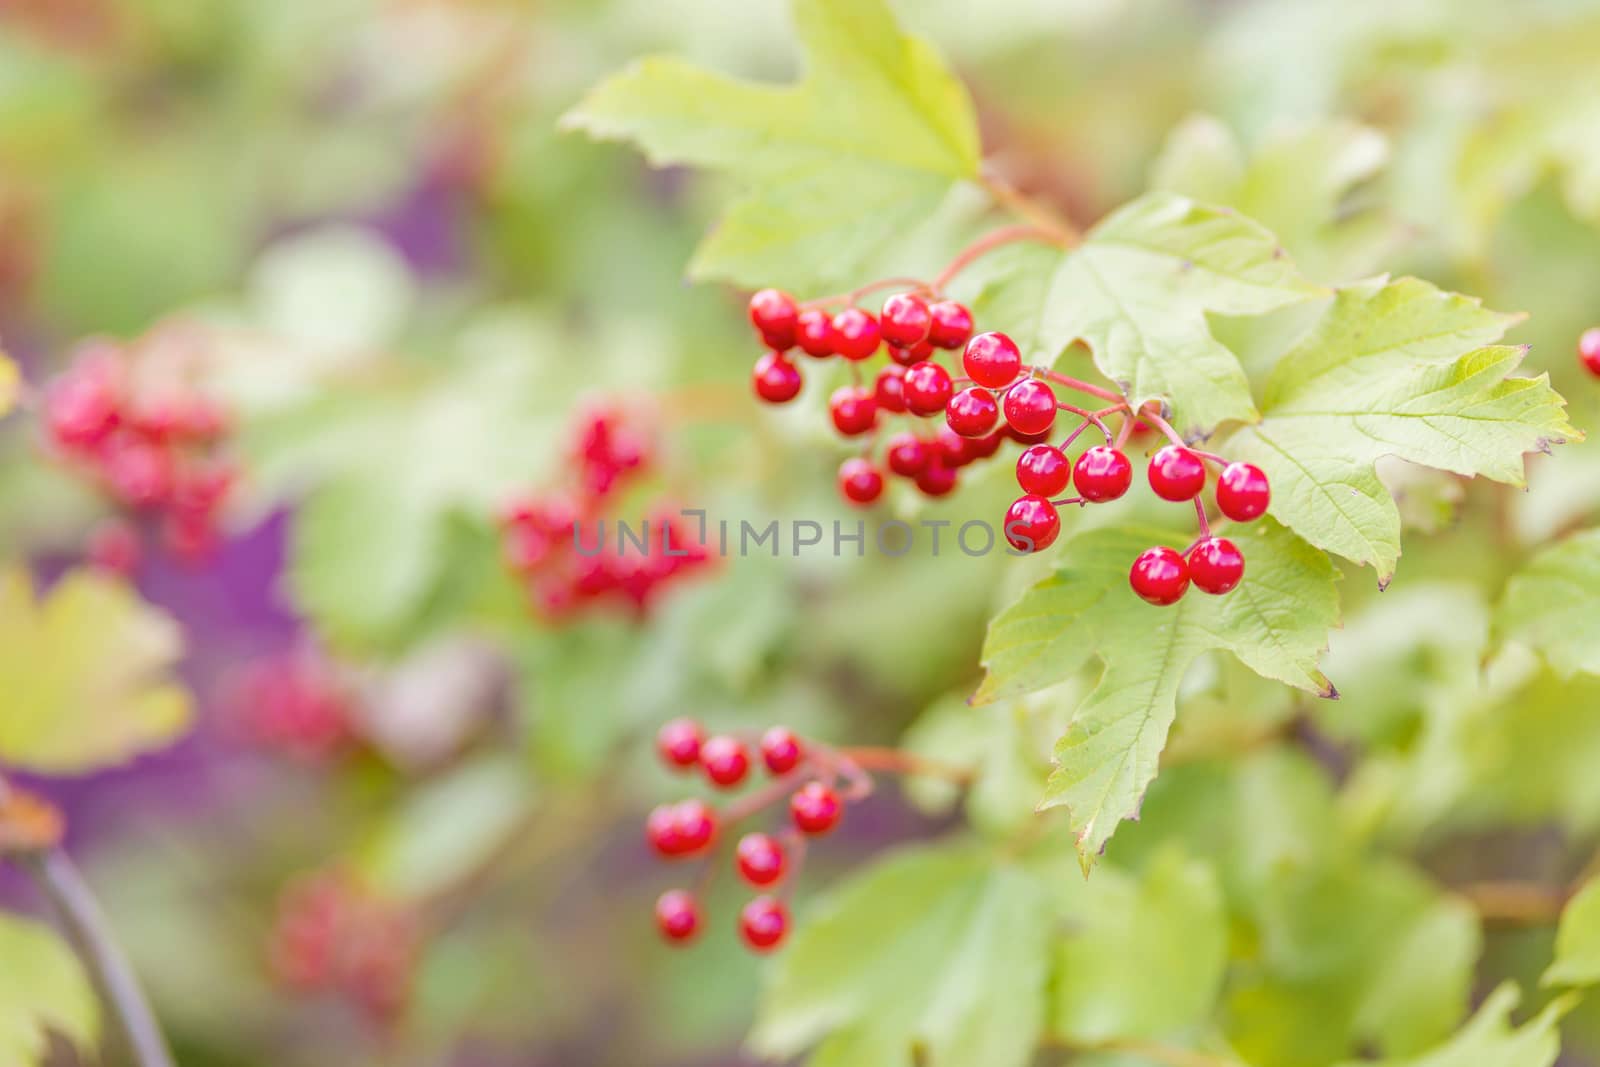 Viburnum berry on a branch in the sun. A bunch of red berries on a branch. Golden autumn harvesting